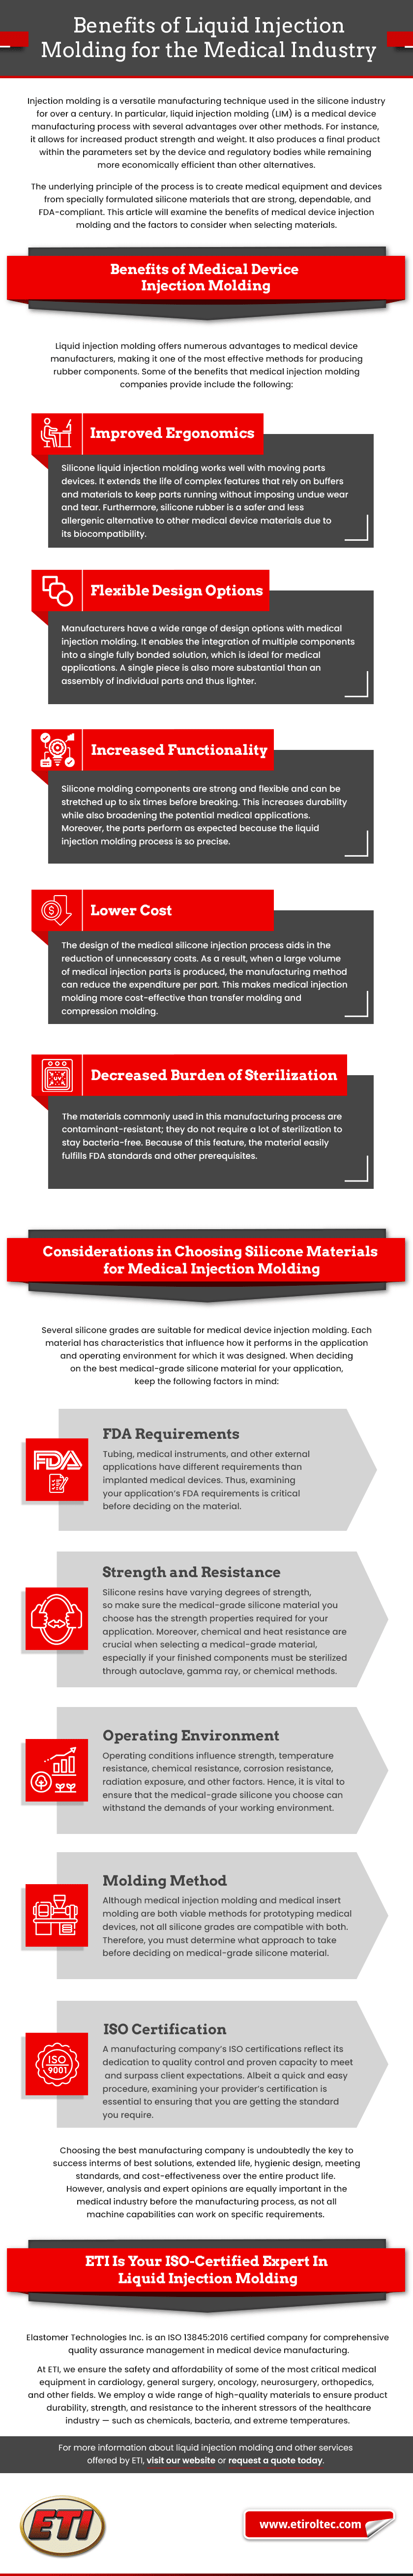 Benefits of Liquid Injection Molding for the Medical Industry